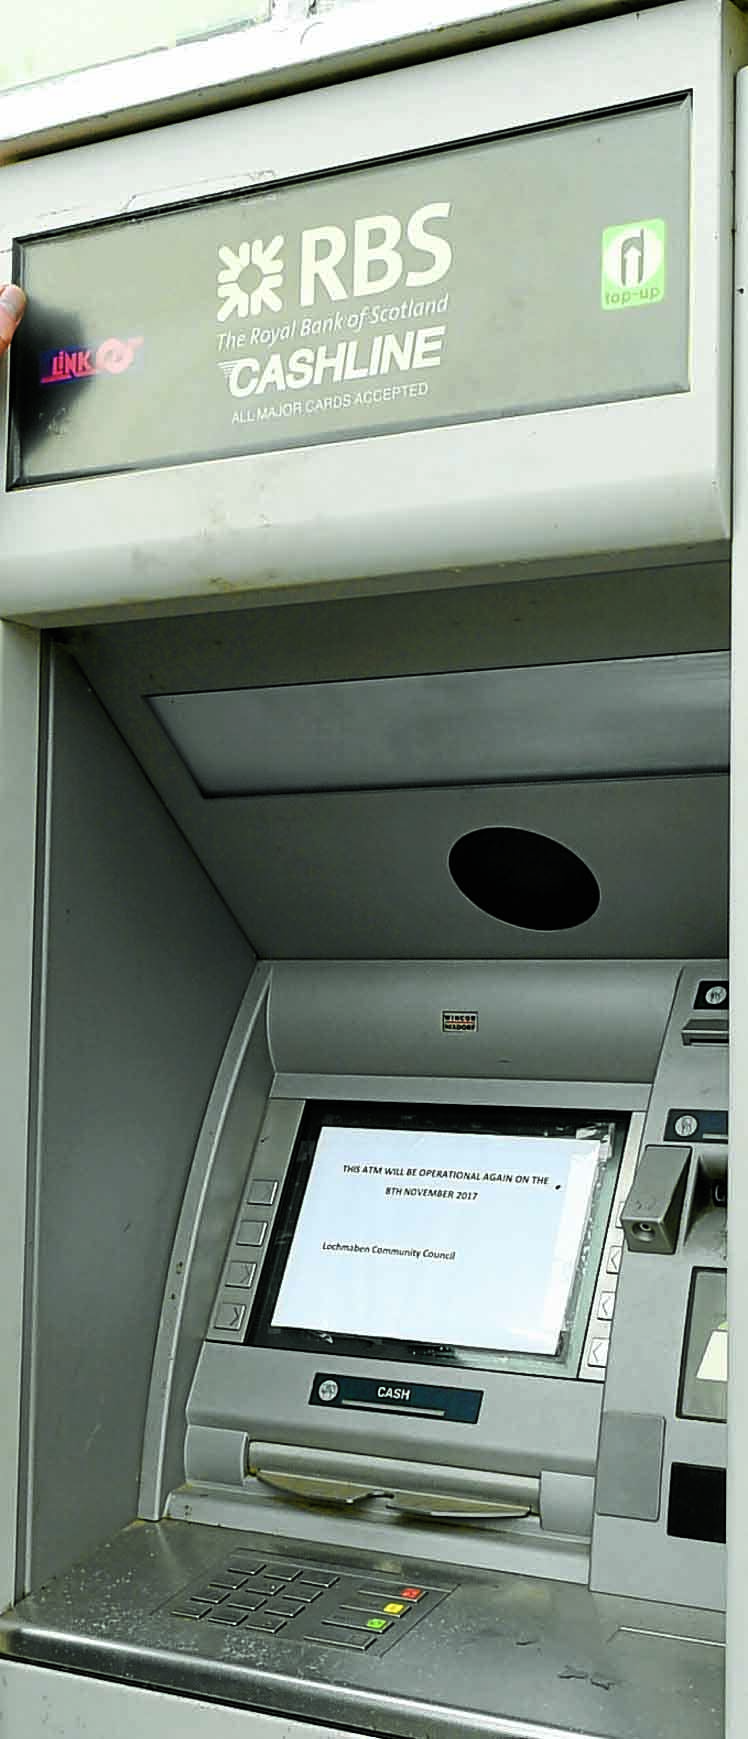 Burgh cash machine to be removed